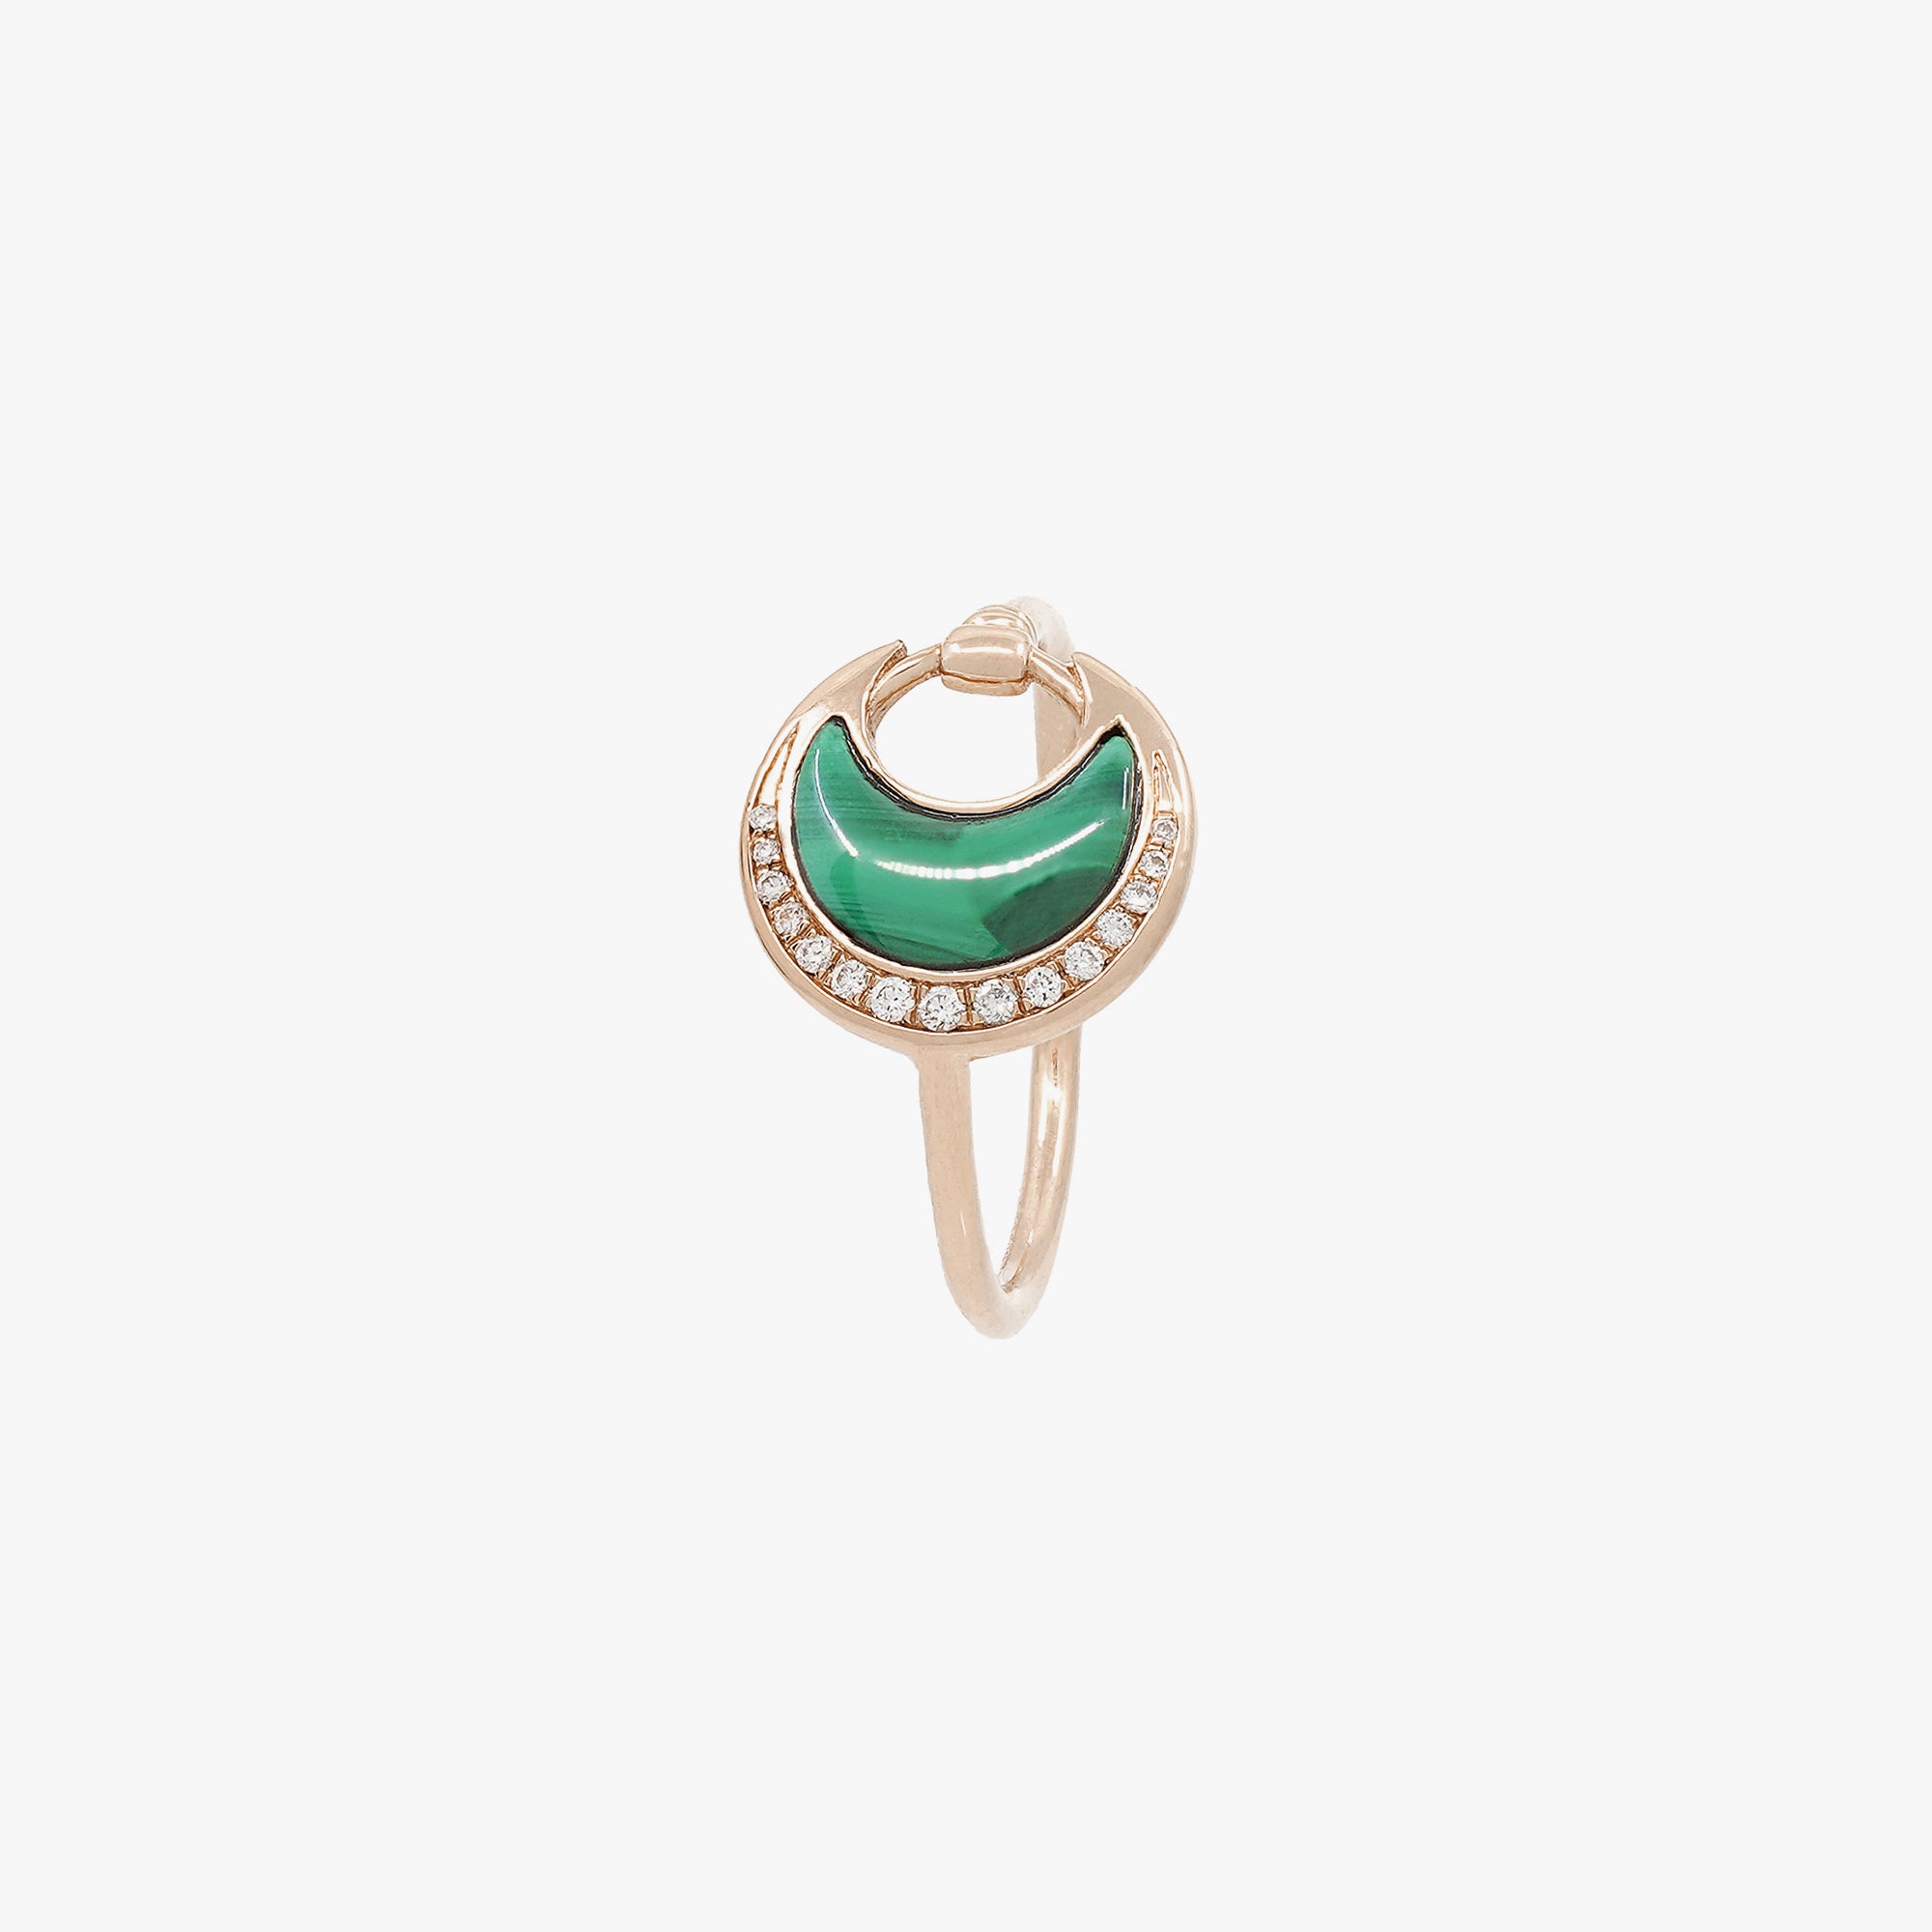 Al Hilal ring in rose gold with malachite stone and diamonds